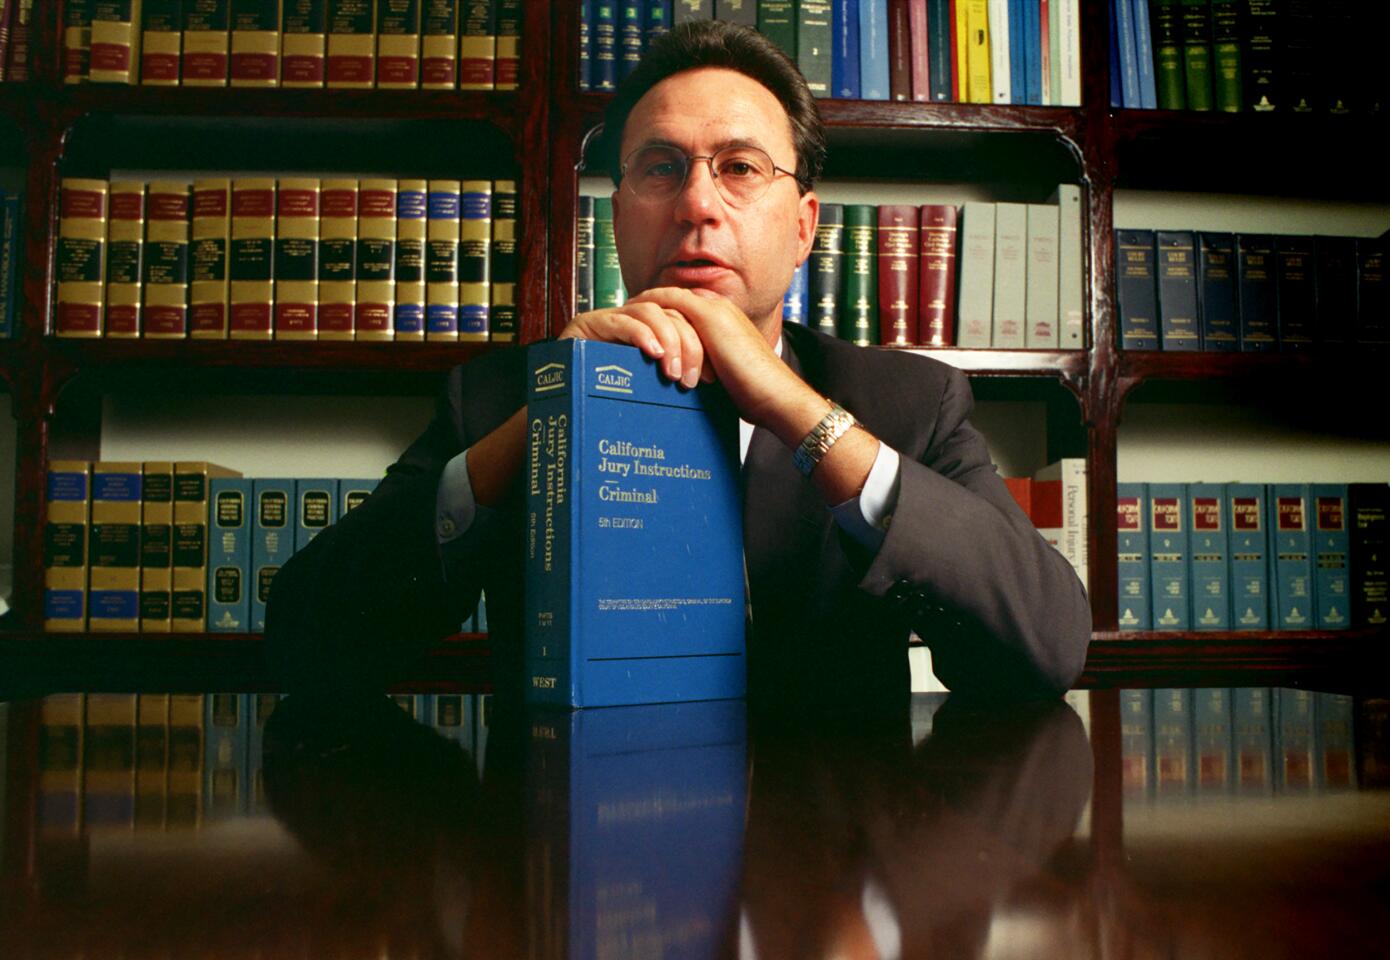 Jack Earley, one of the top criminal defense attorneys in Orange County, is shown in his Irvine law library. Among his high-profile clients is Betty Broderick.